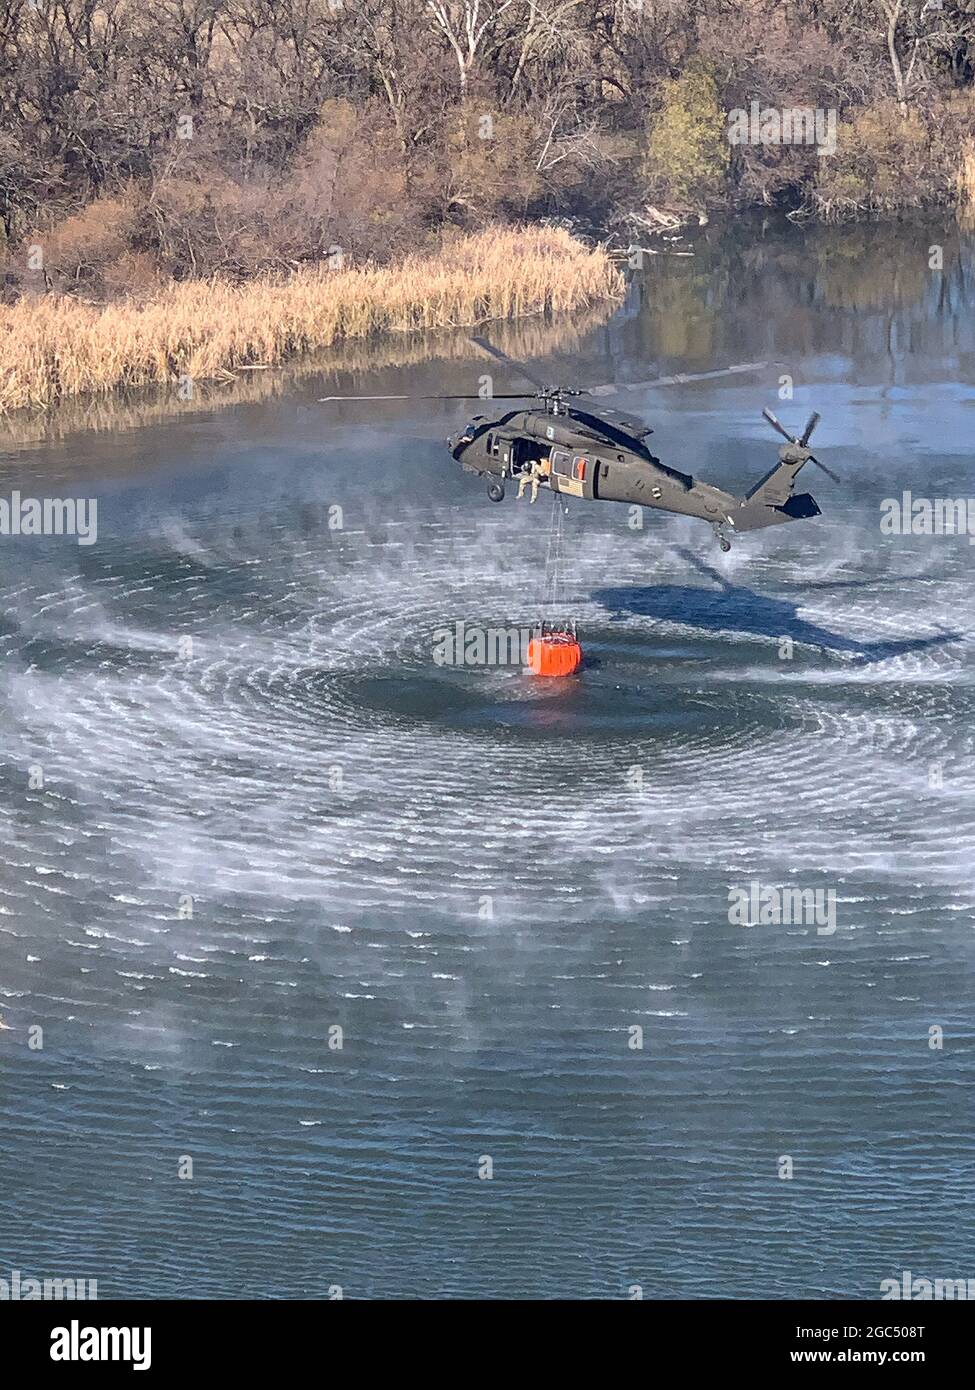 Military helicopter water pickup. Stock Photo